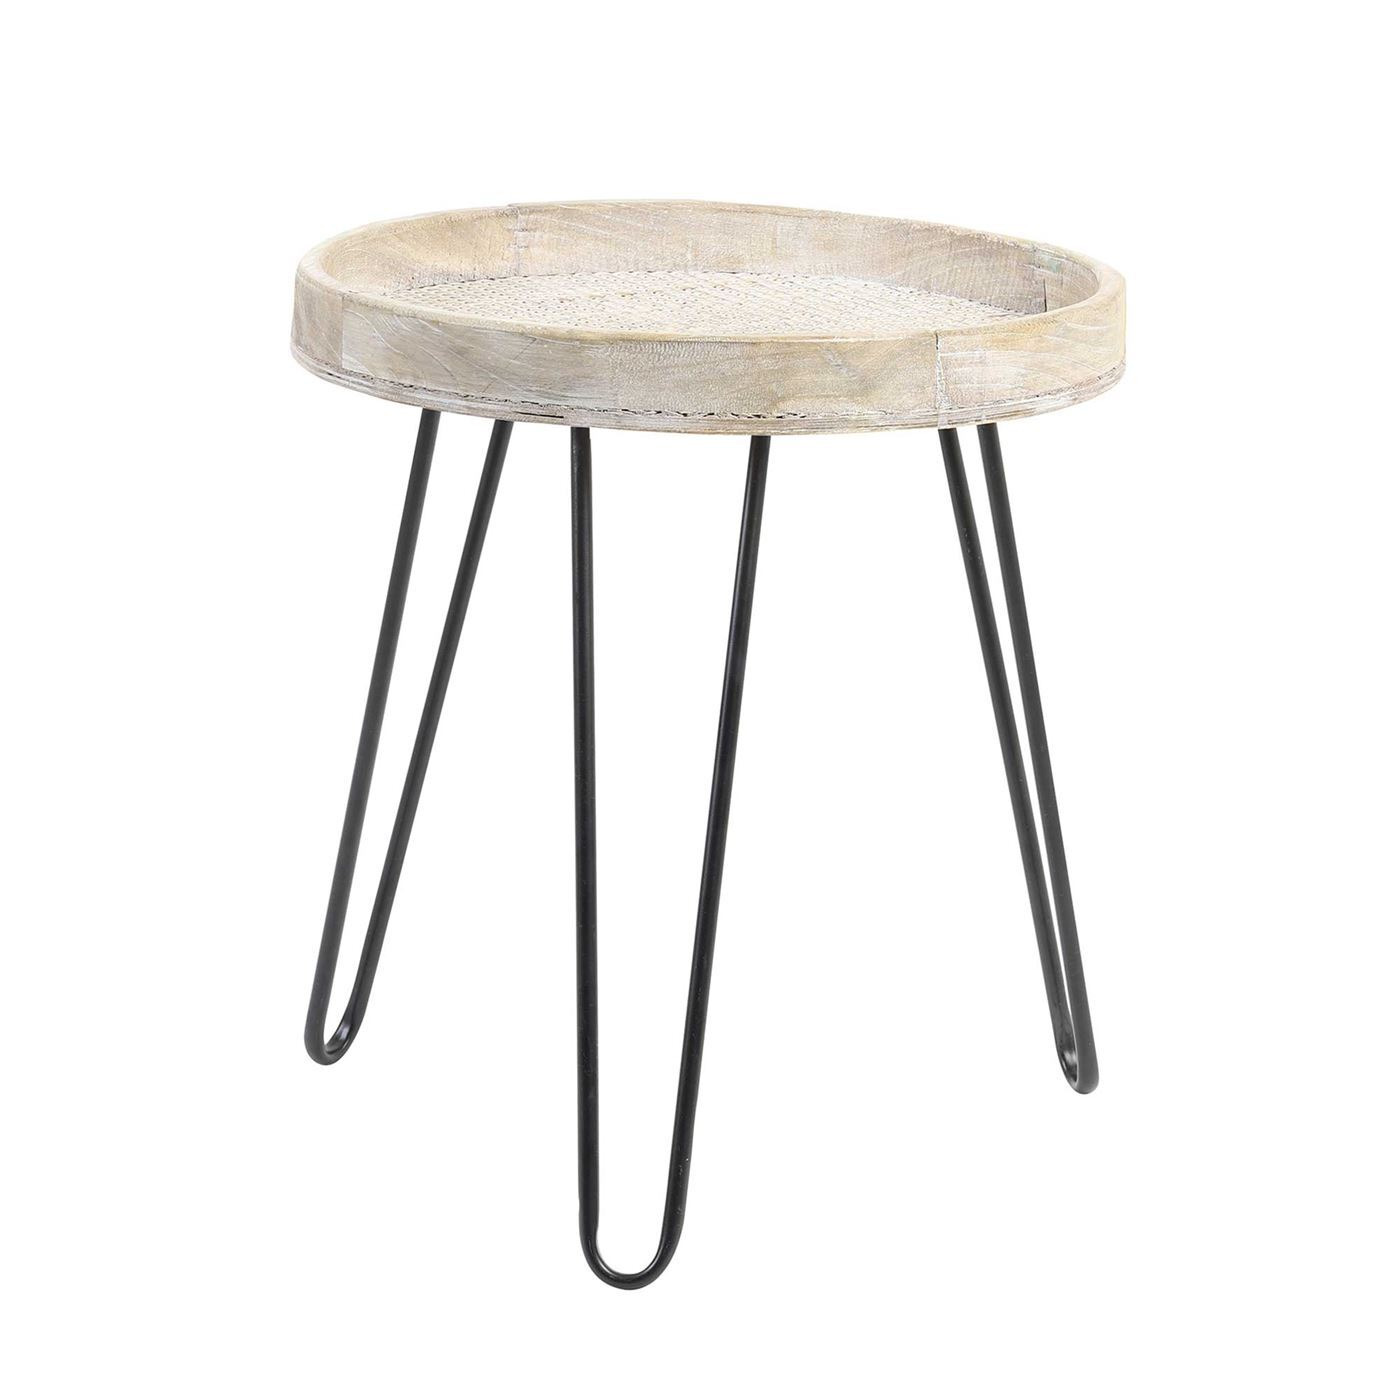 Natural Wood Side Table, Neutral - Barker & Stonehouse - image 1